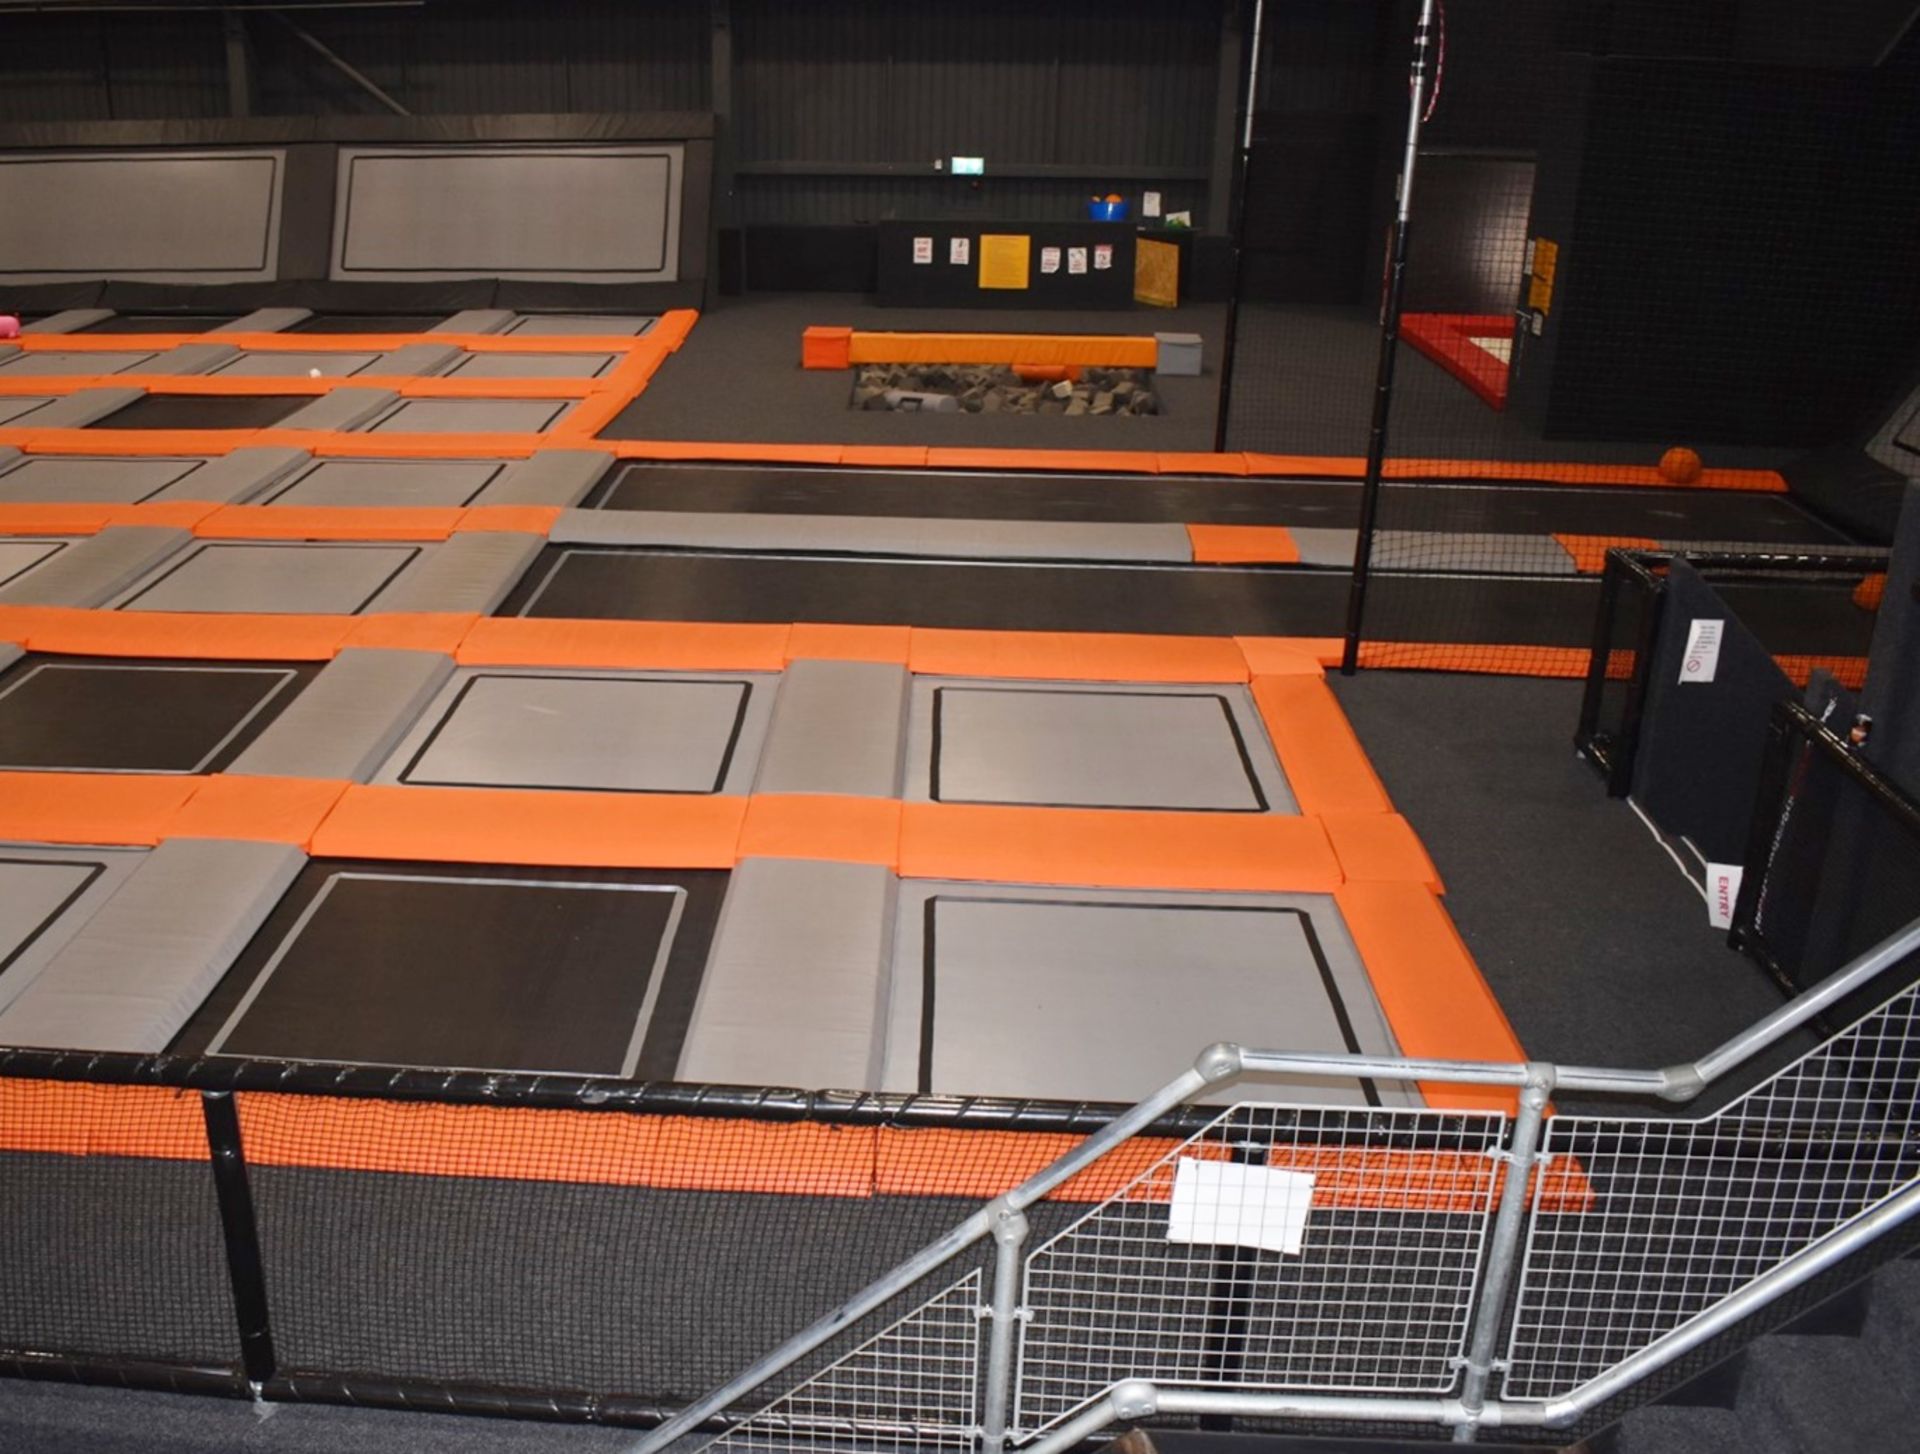 1 x Large Trampoline Park - Disassembled - Includes Dodgeball Arena And Jump Tower - CL766  - - Image 14 of 99